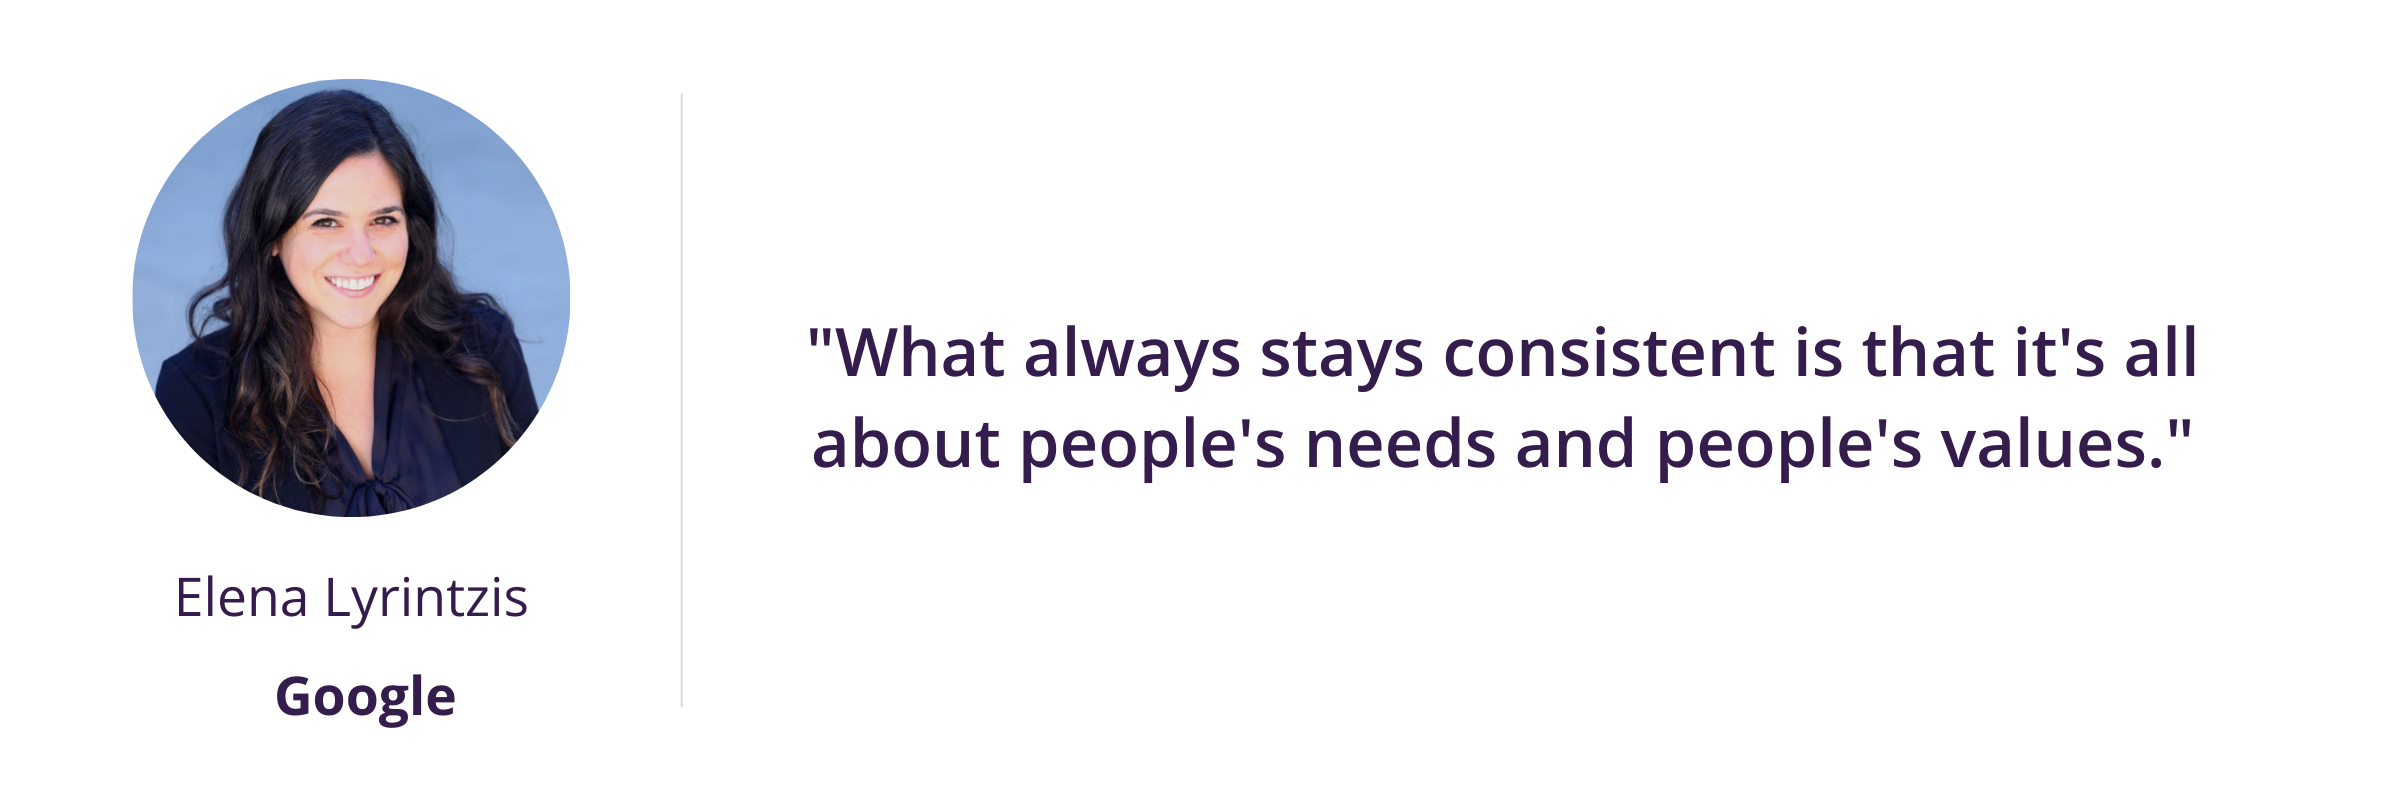 insight trends "What always stays consistent is that it's all about people's needs and people's values."